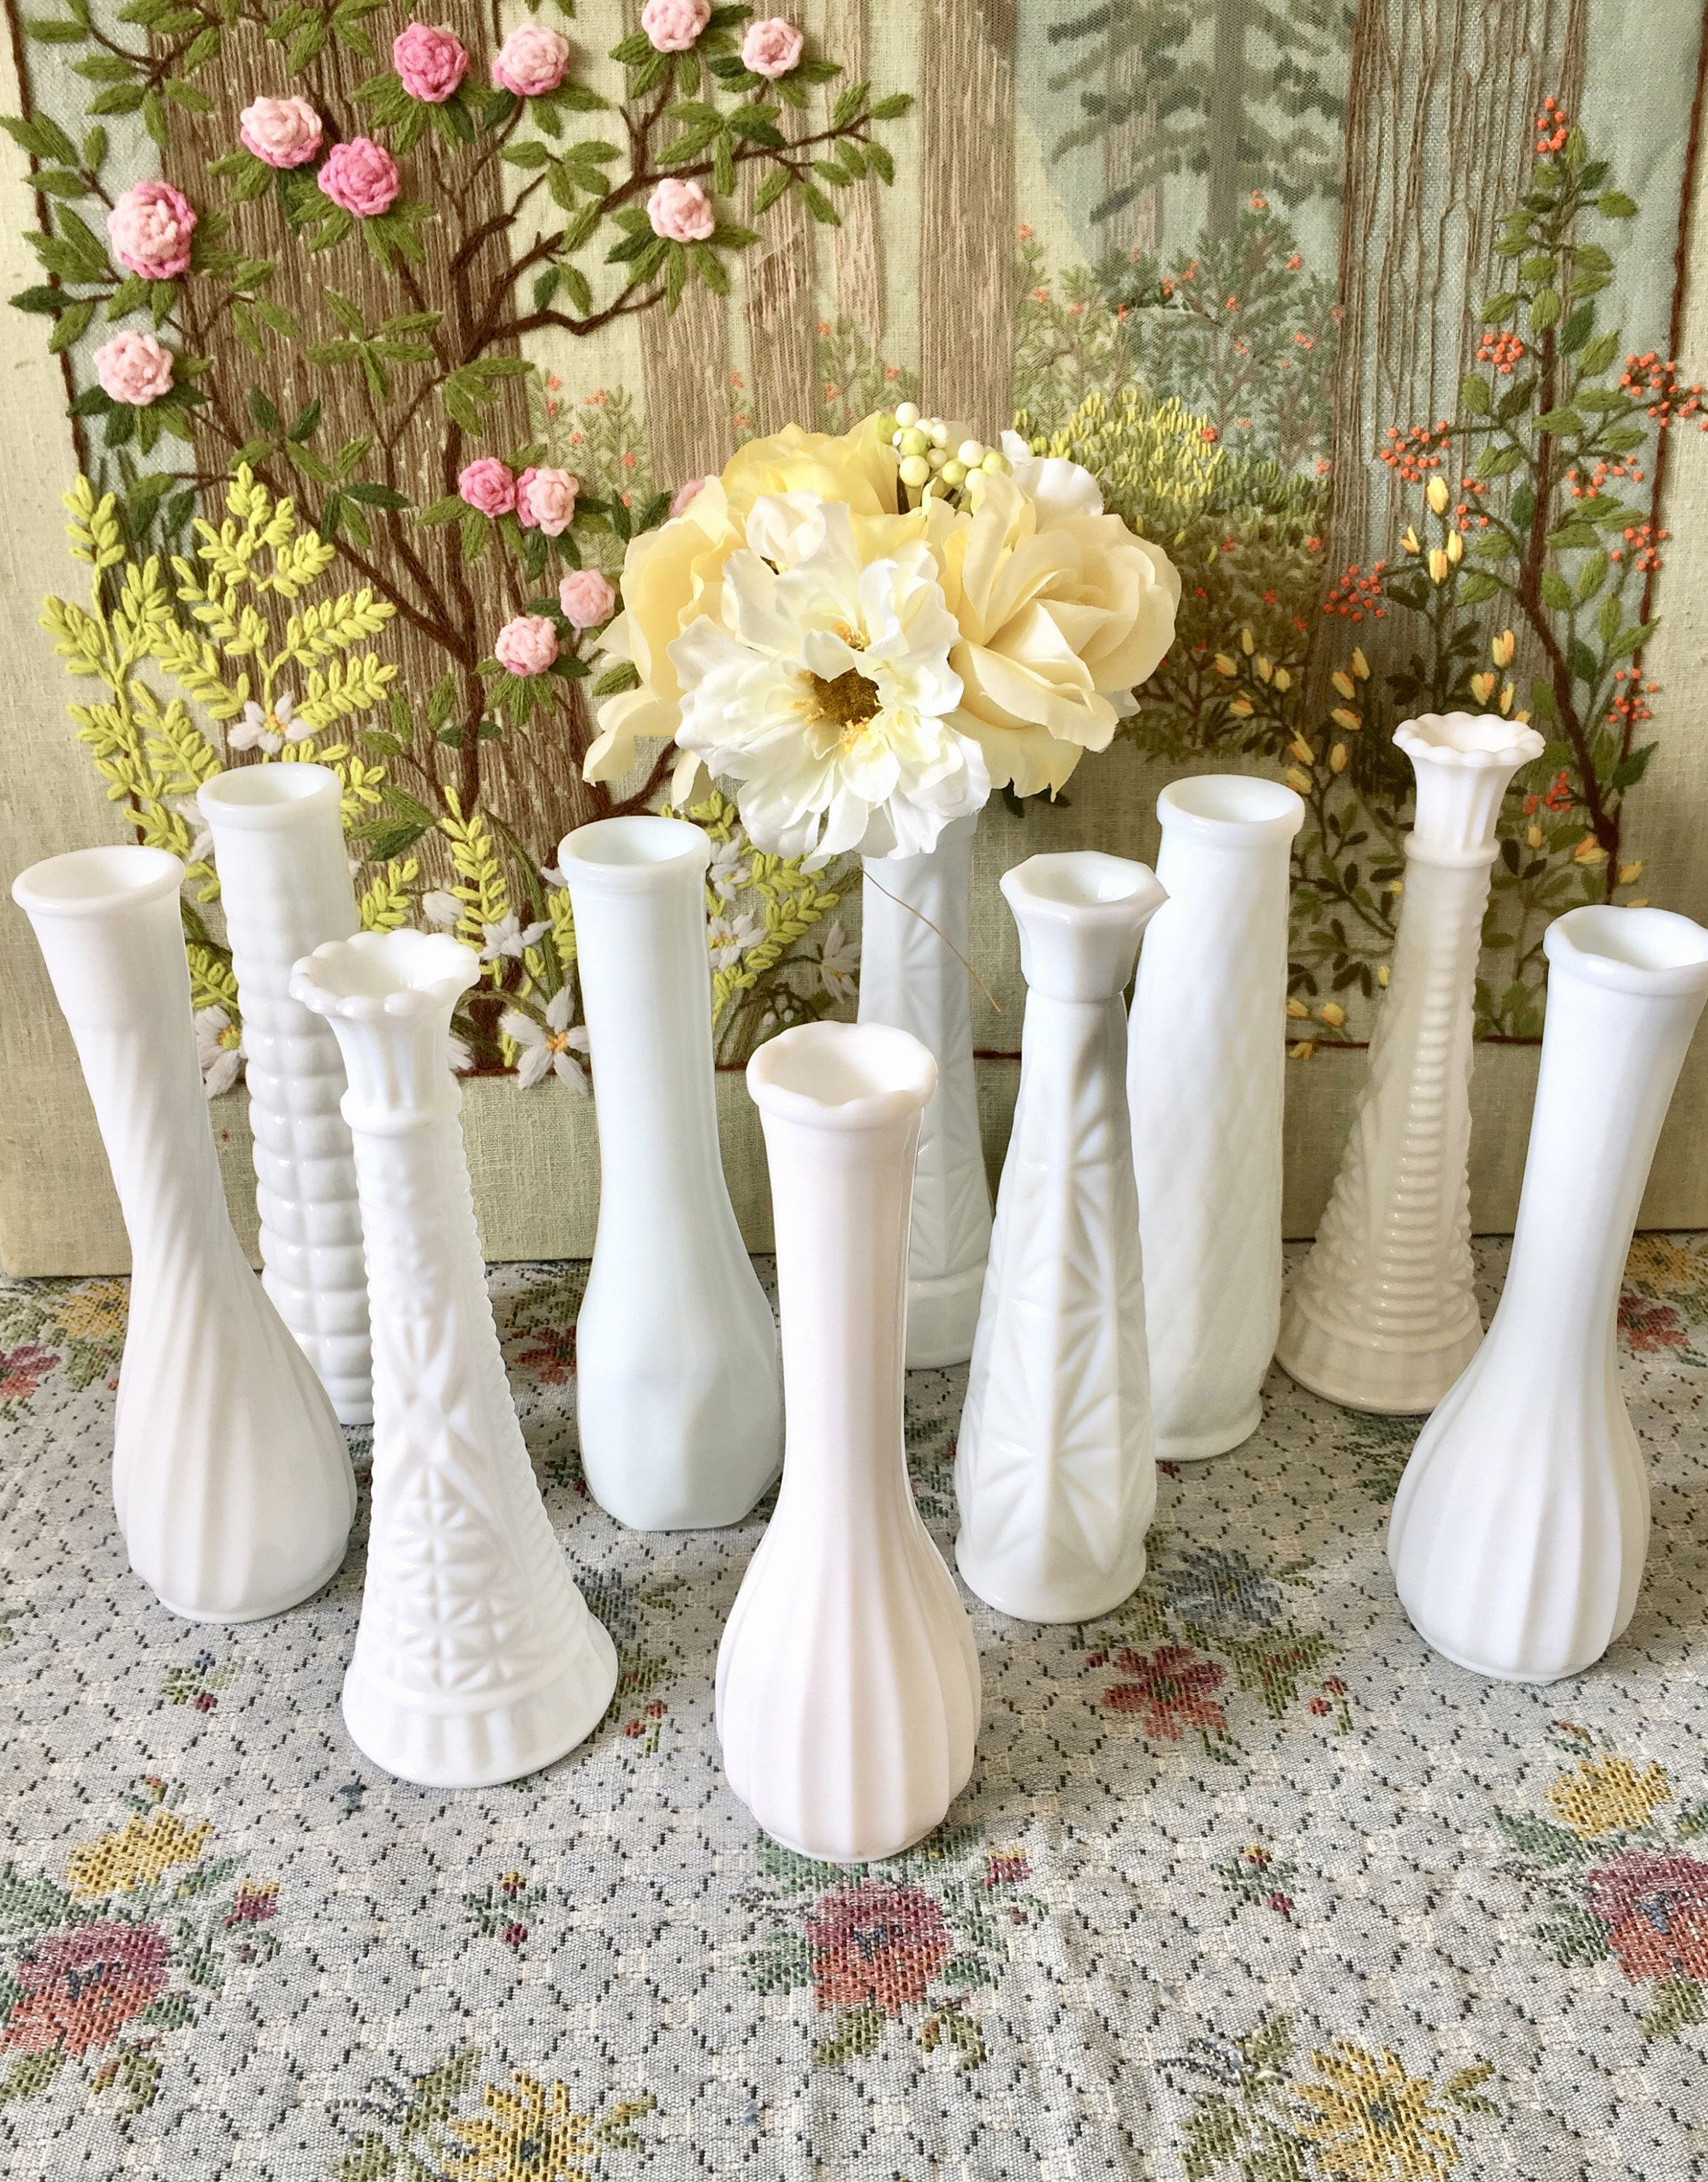 16 Stunning Small Cylinder Vases Bulk 2024 free download small cylinder vases bulk of 40 glass vases bulk the weekly world in centerpiece vases in bulk vase and cellar image avorcor